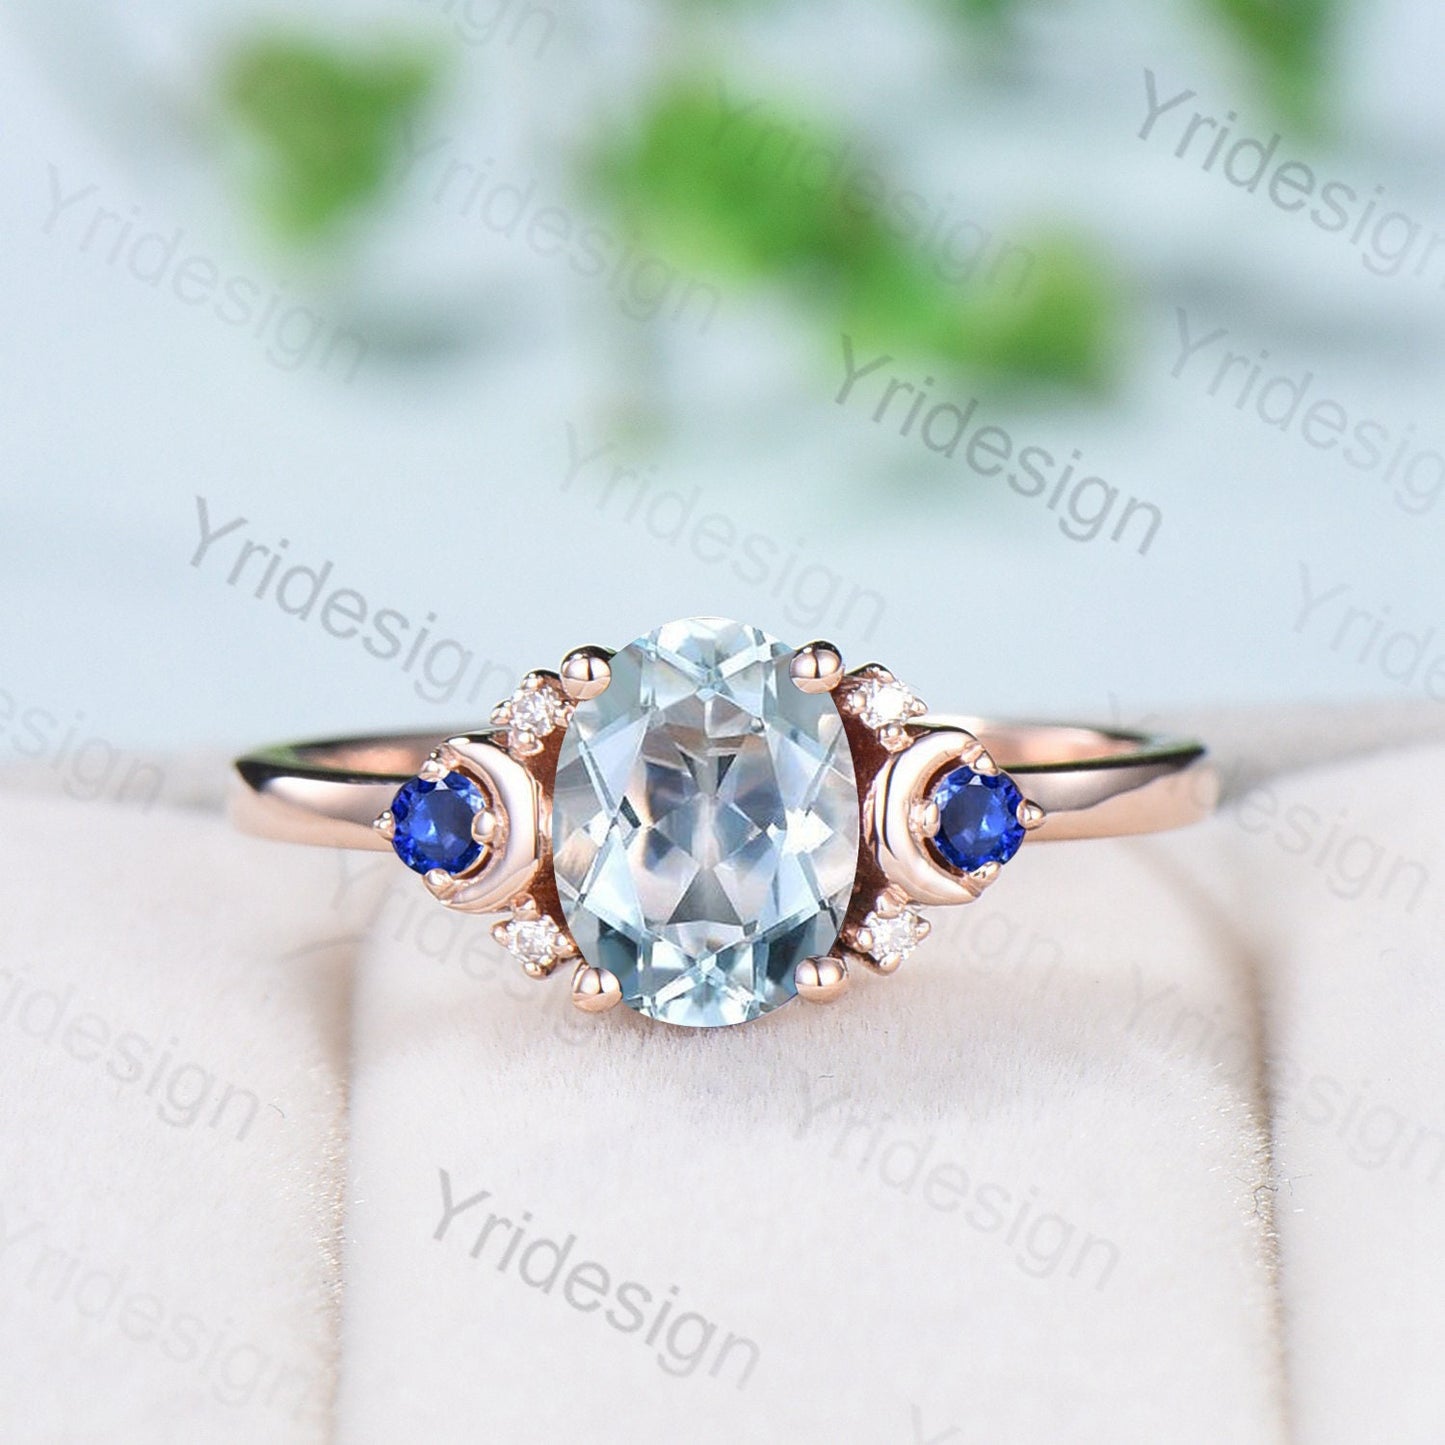 Vintage Aquamarine Engagement Ring Unique Nature Inspired Moon Cluster Sapphire Wedding Ring Unique Gold Alternative Promise Ring For Women - PENFINE